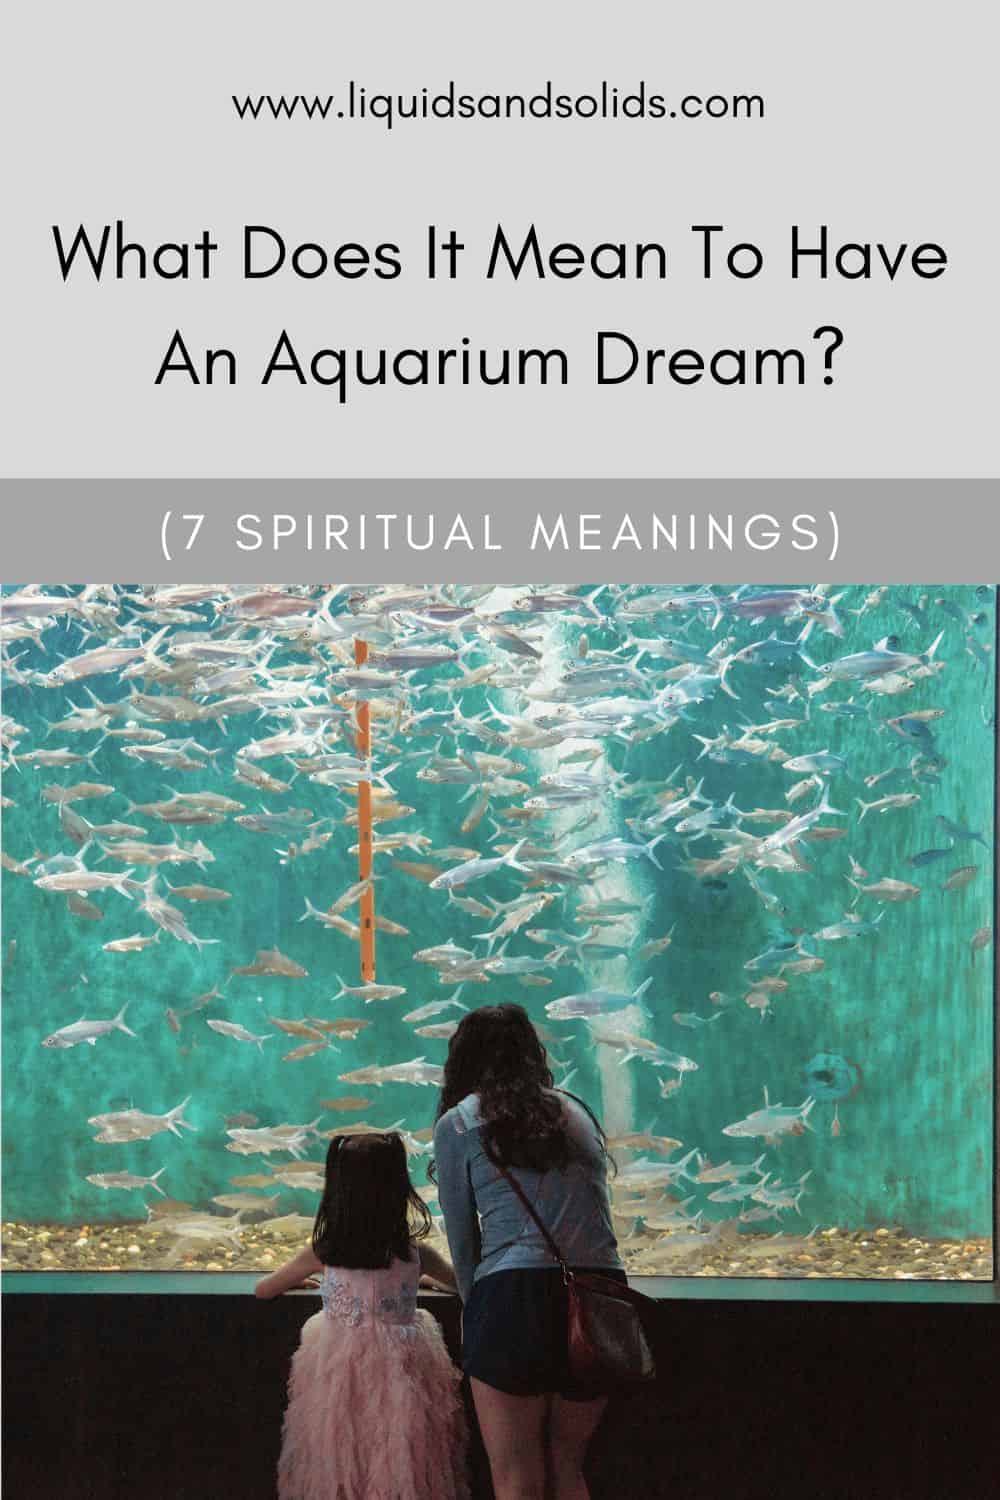 What Does It Mean To Have An Aquarium Dream? (7 Spiritual Meanings)